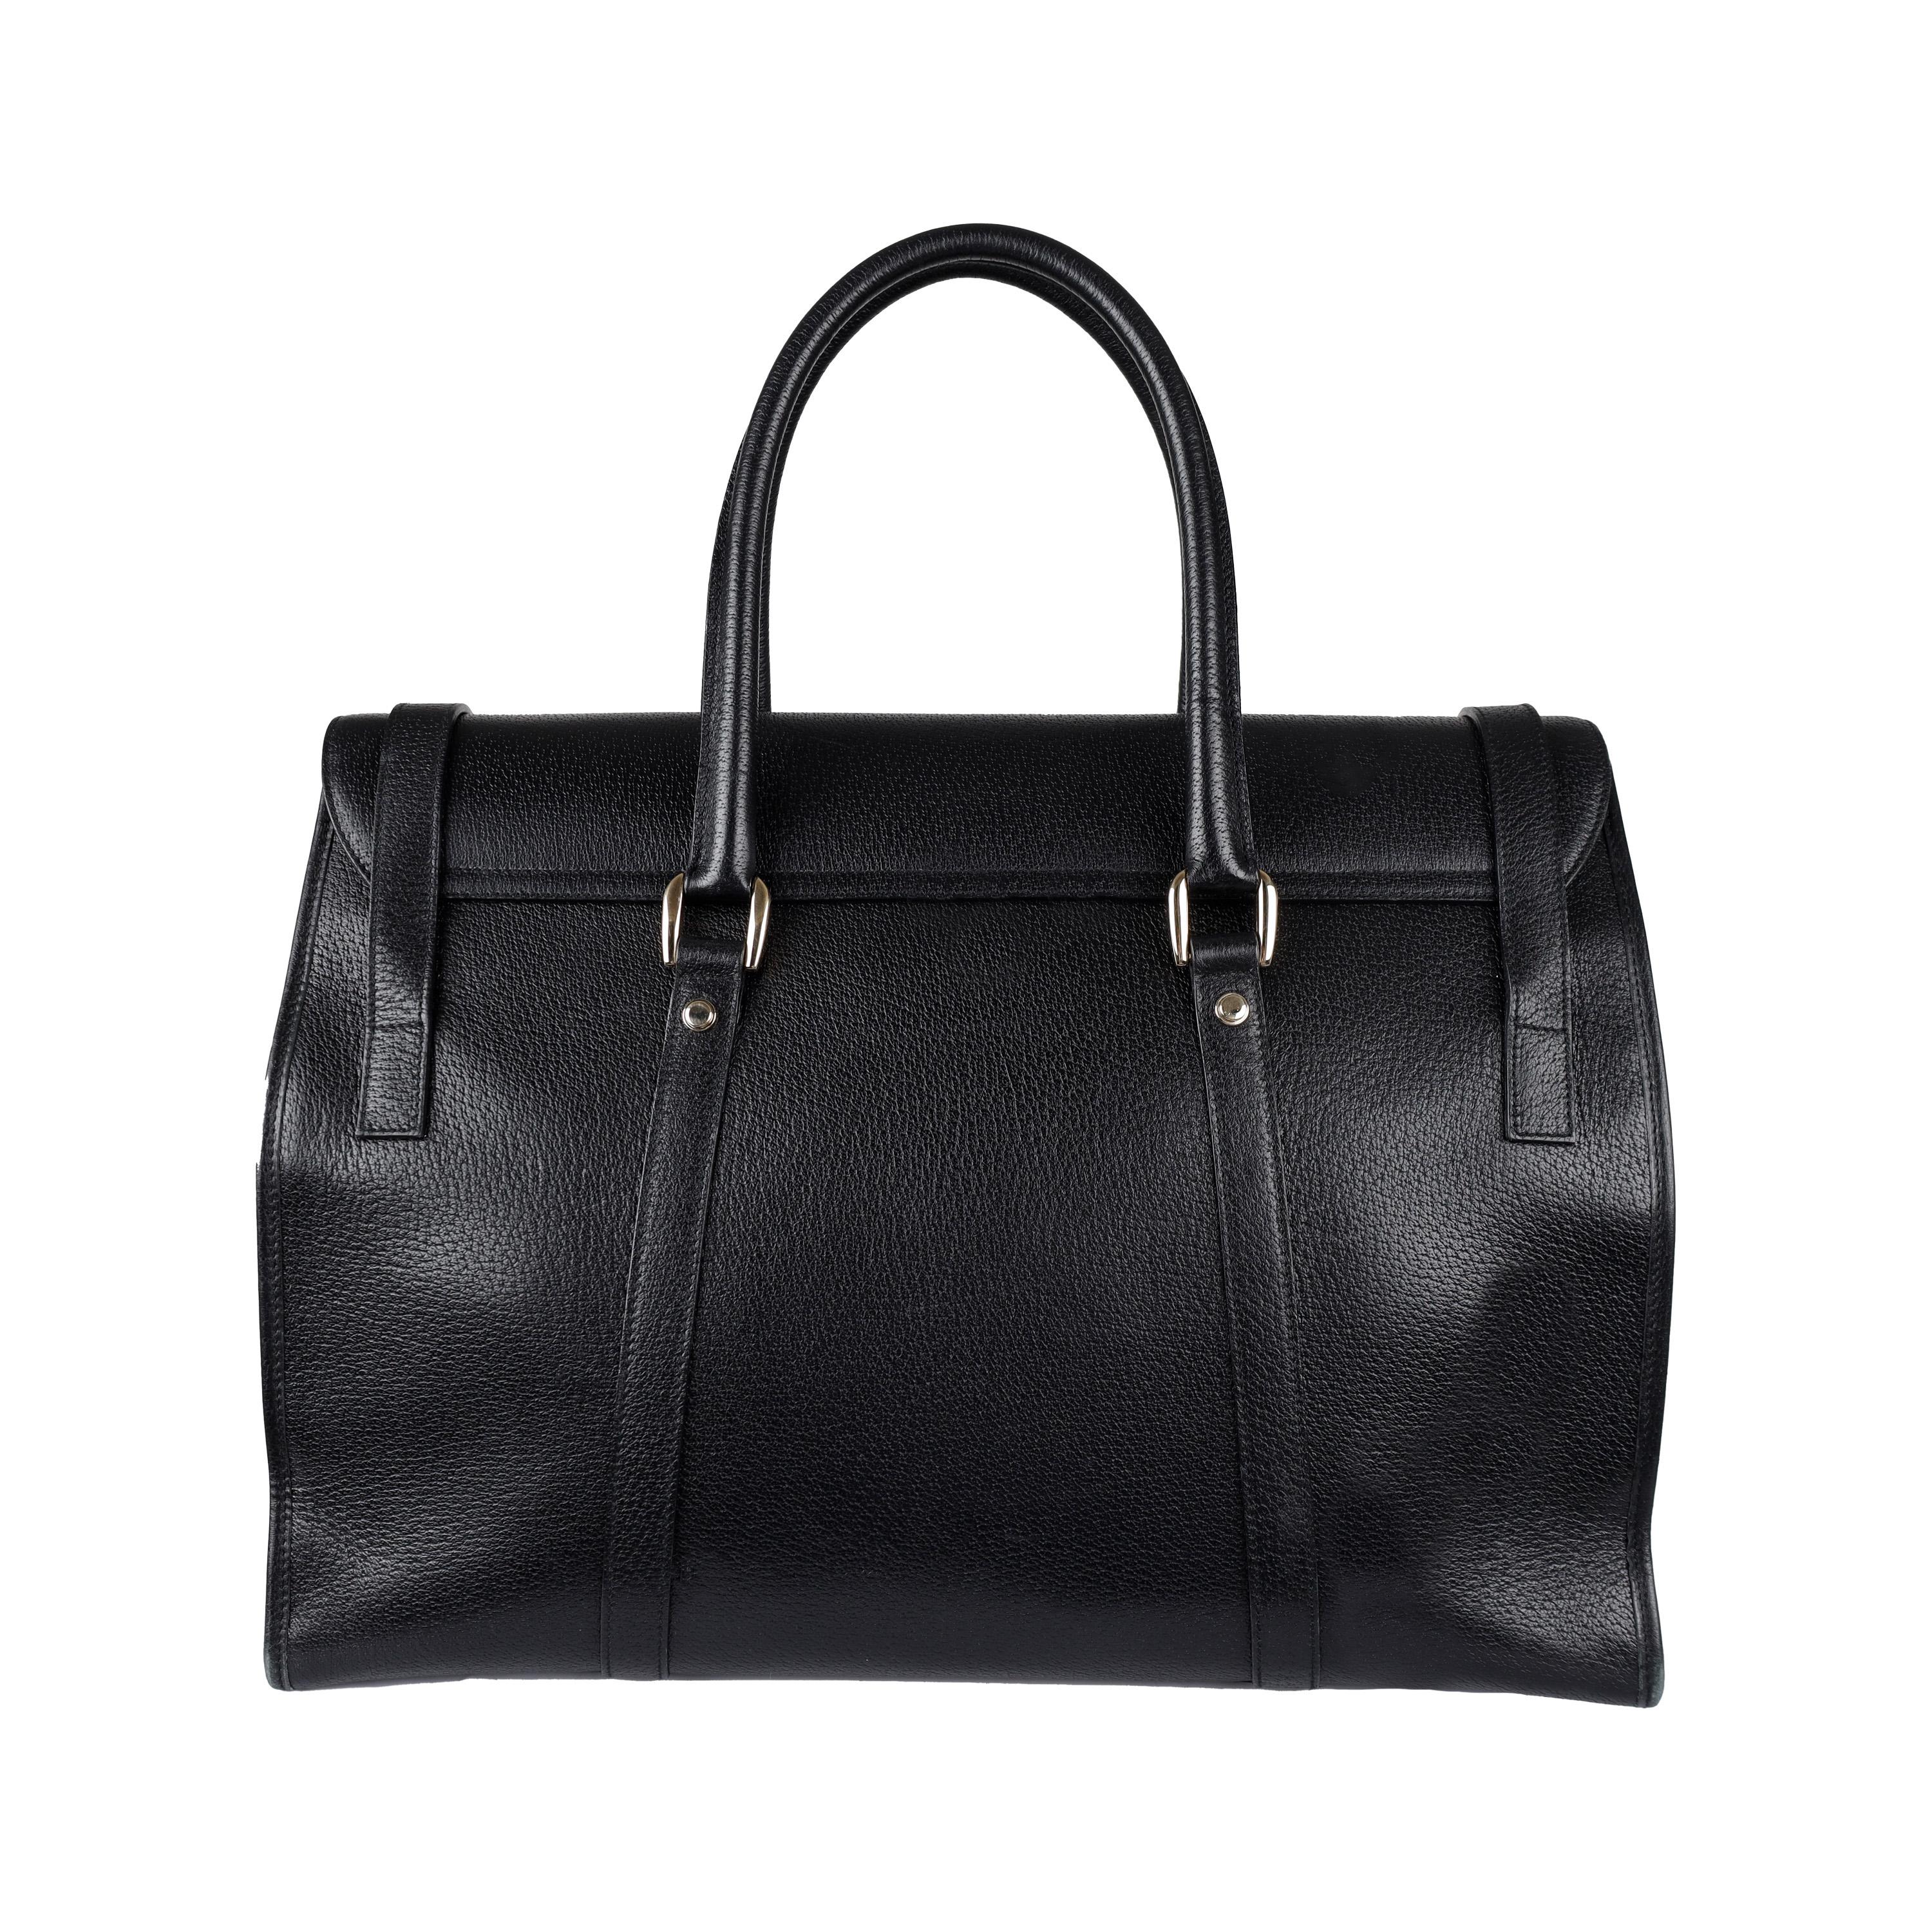 This Gucci Black Leather Satchel Bag is the perfect combination of style and function. Crafted from genuine leather, it sports a sleek black design, dual buckle closures, and a large interior pocket offering plenty of space for your belongings.